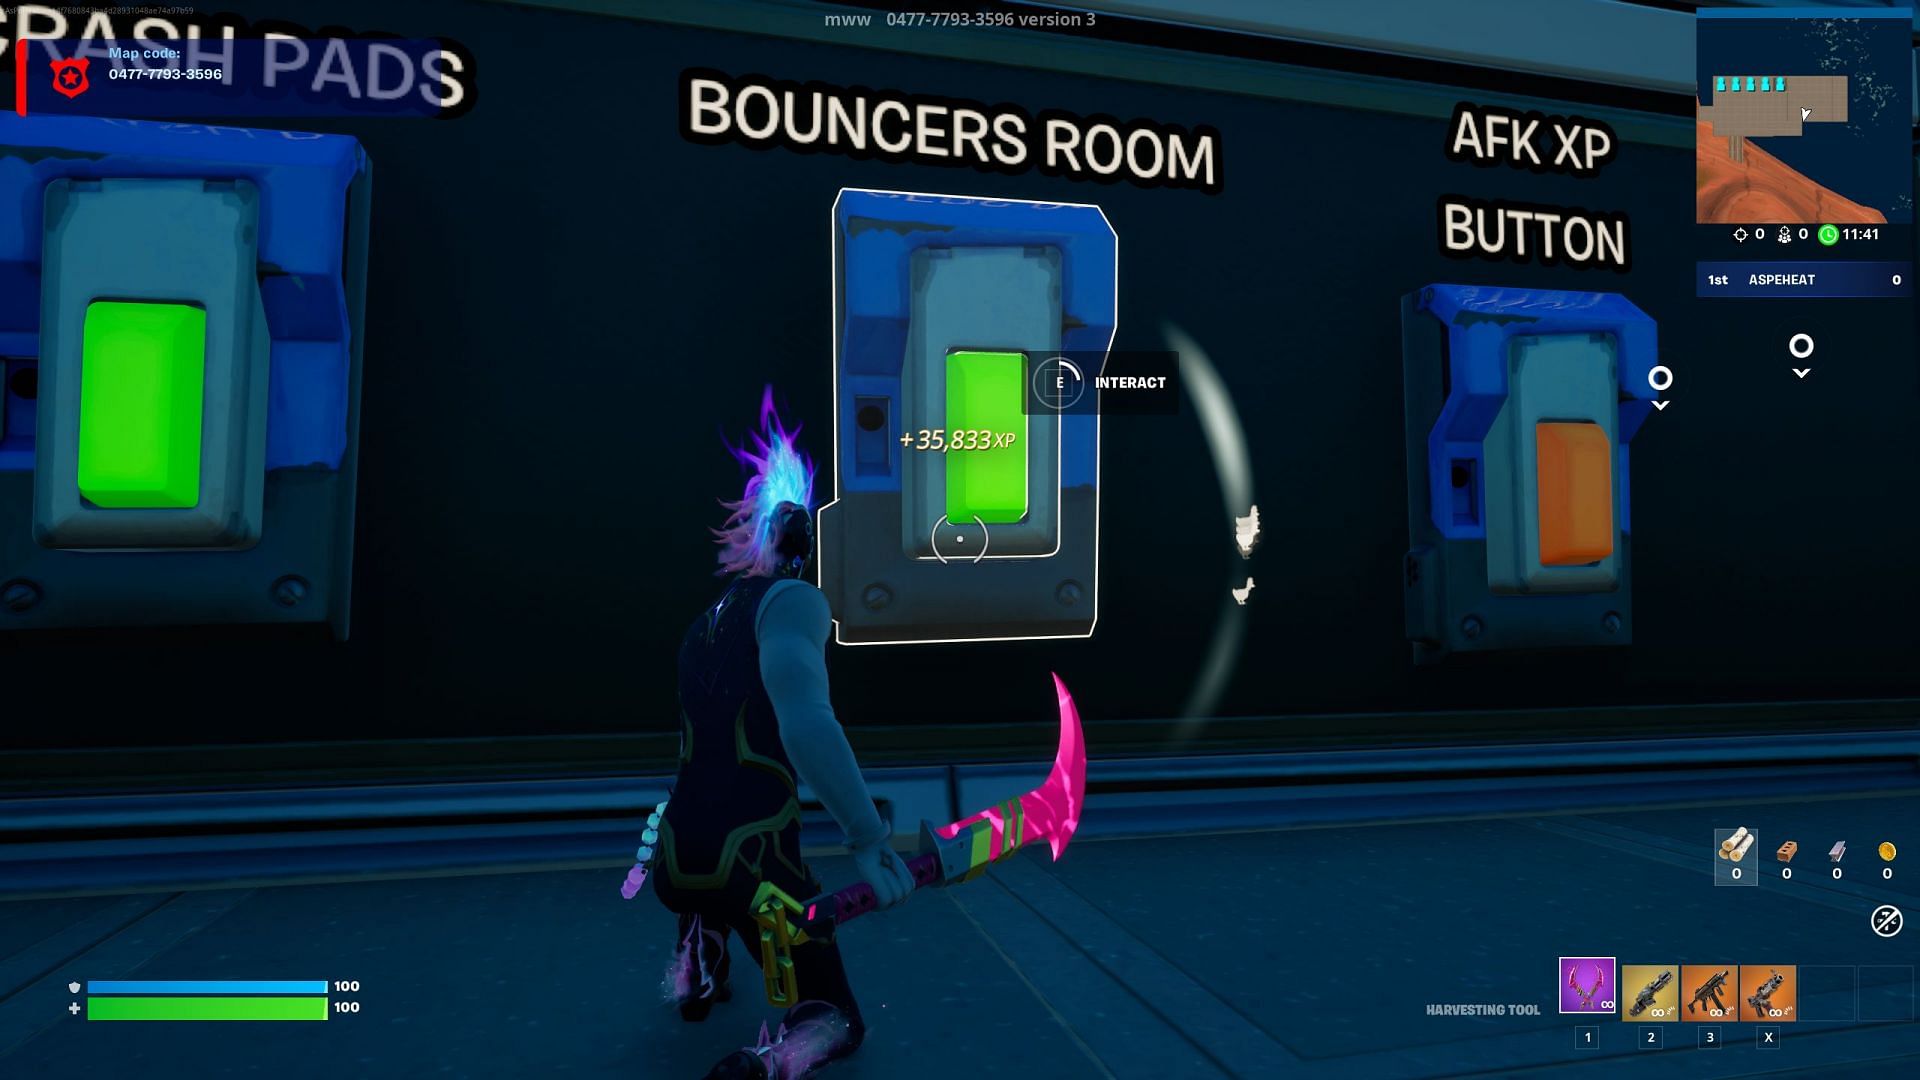 Enter the Bouncers Room to avoid getting kicked for being AFK. (Image via Epic Games)